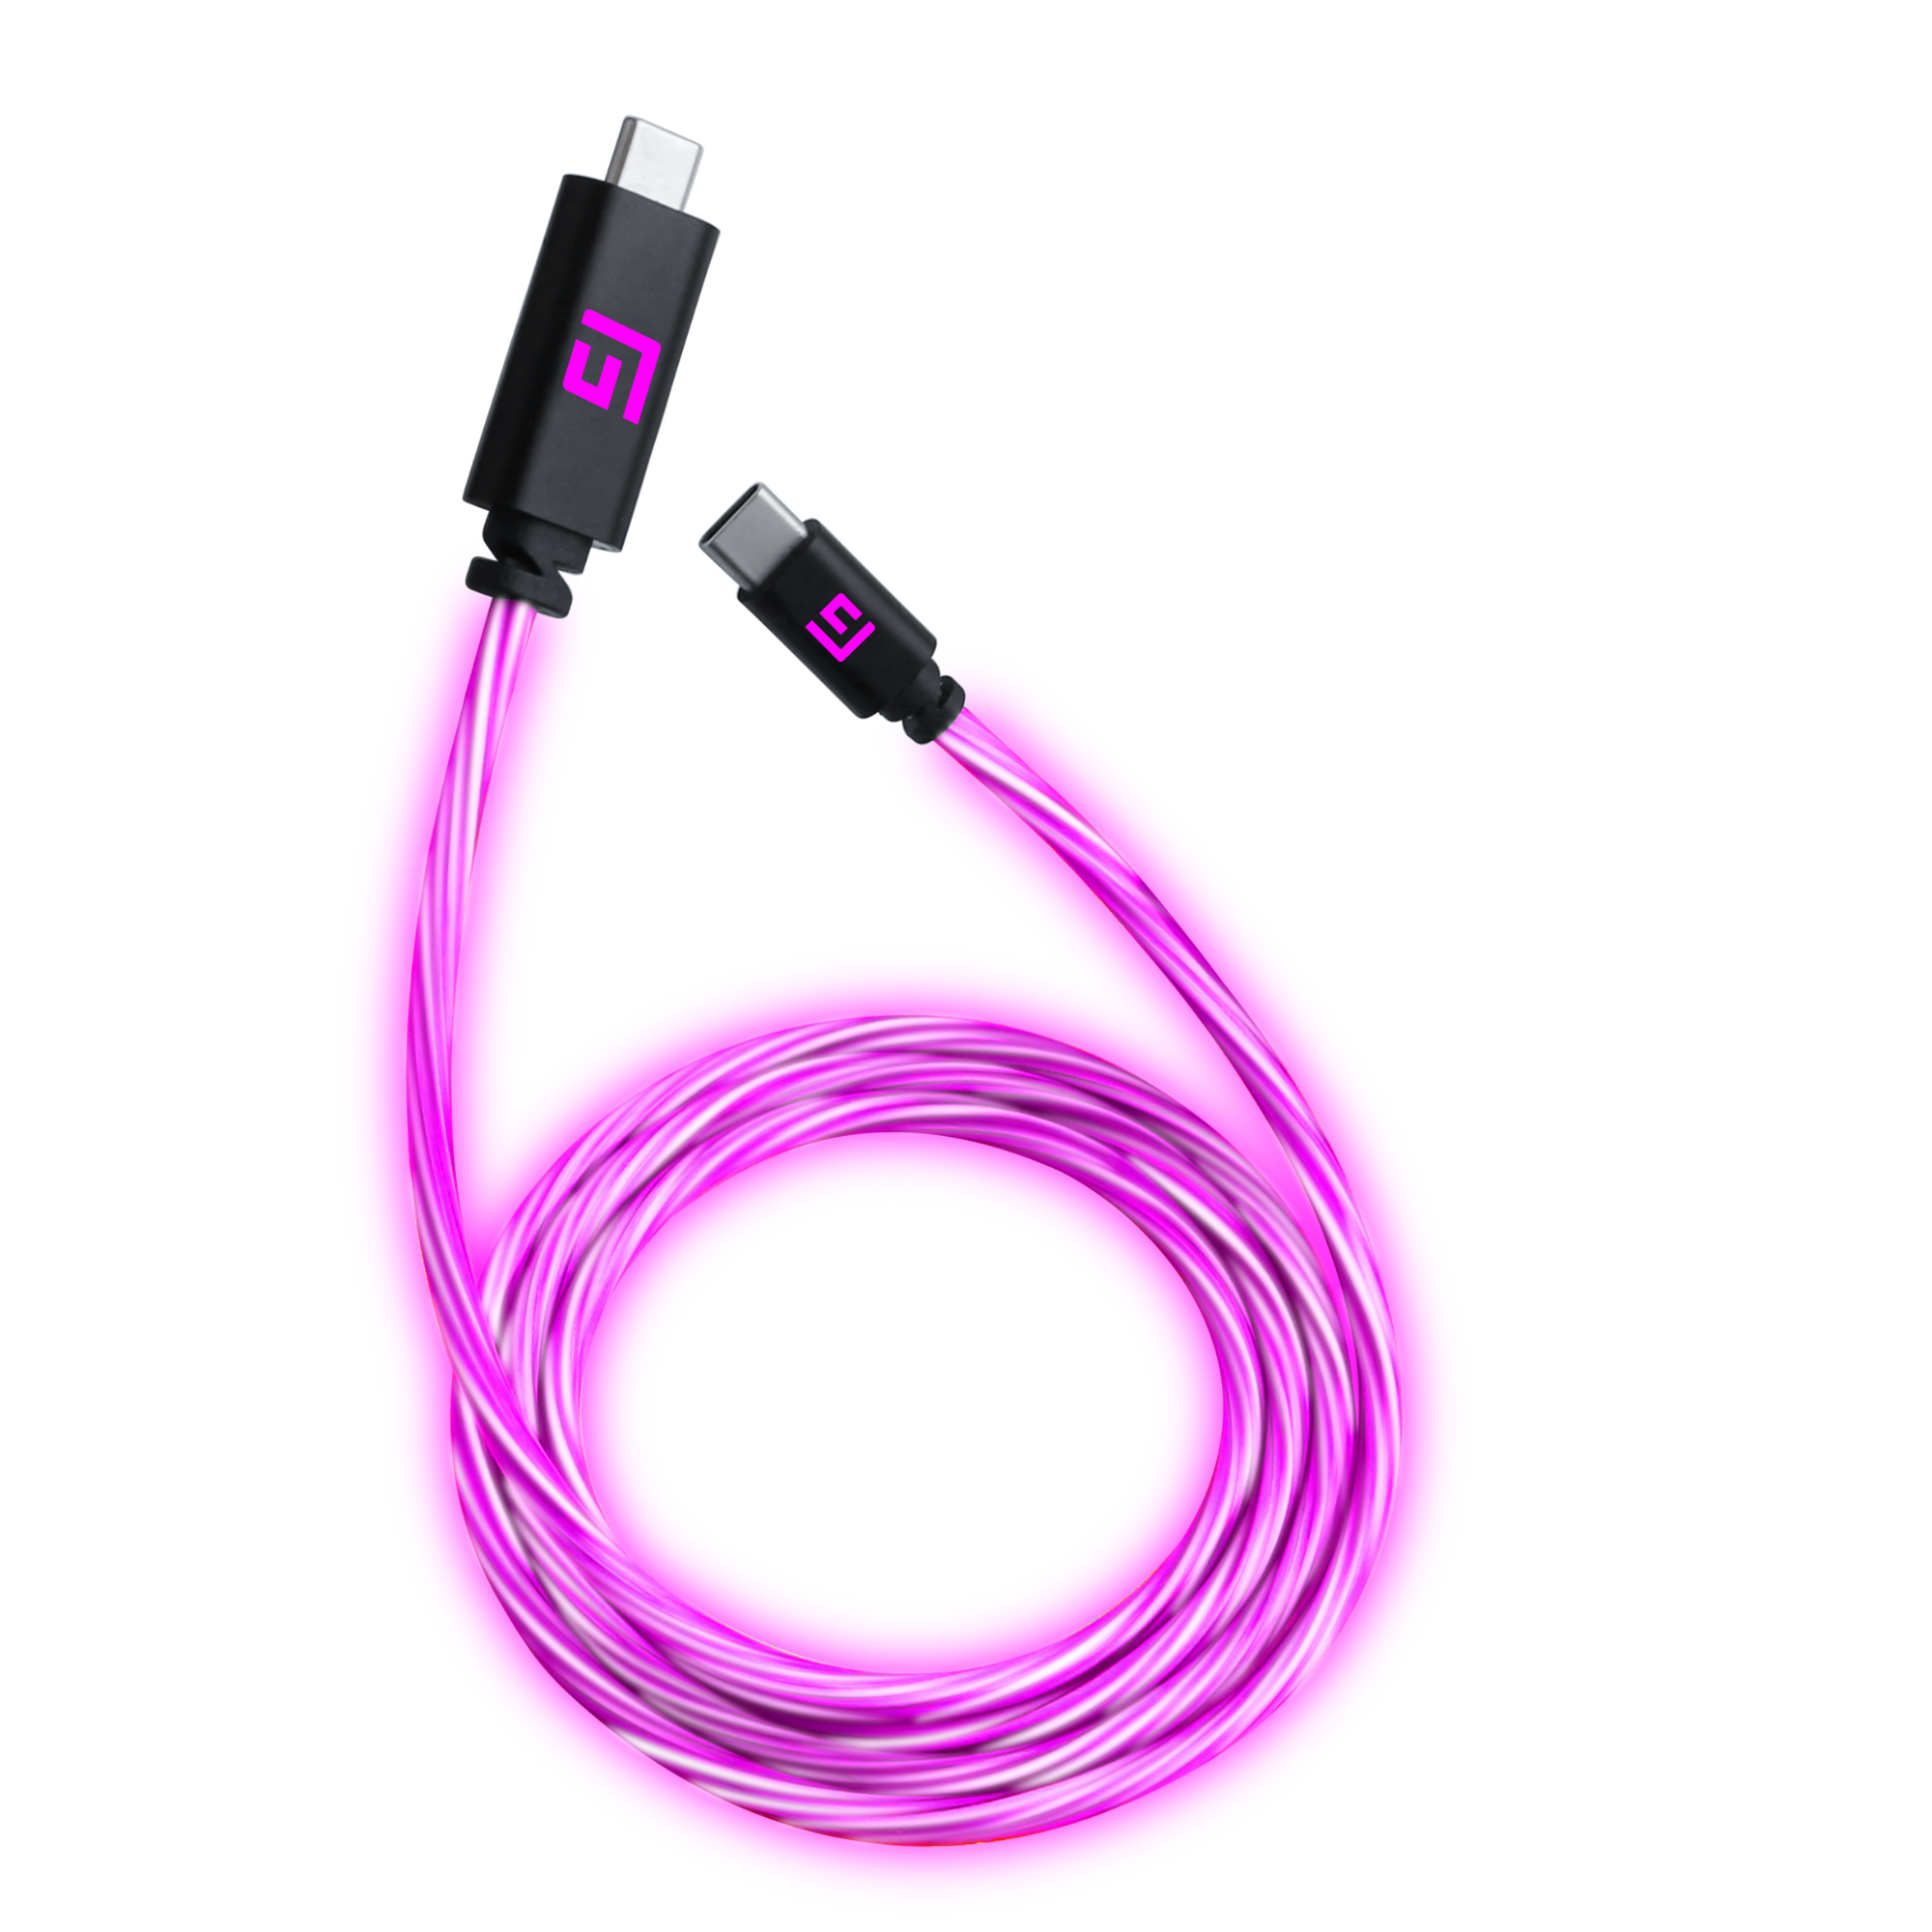 USB-C Cables with LED light  High Speed for charge + sync